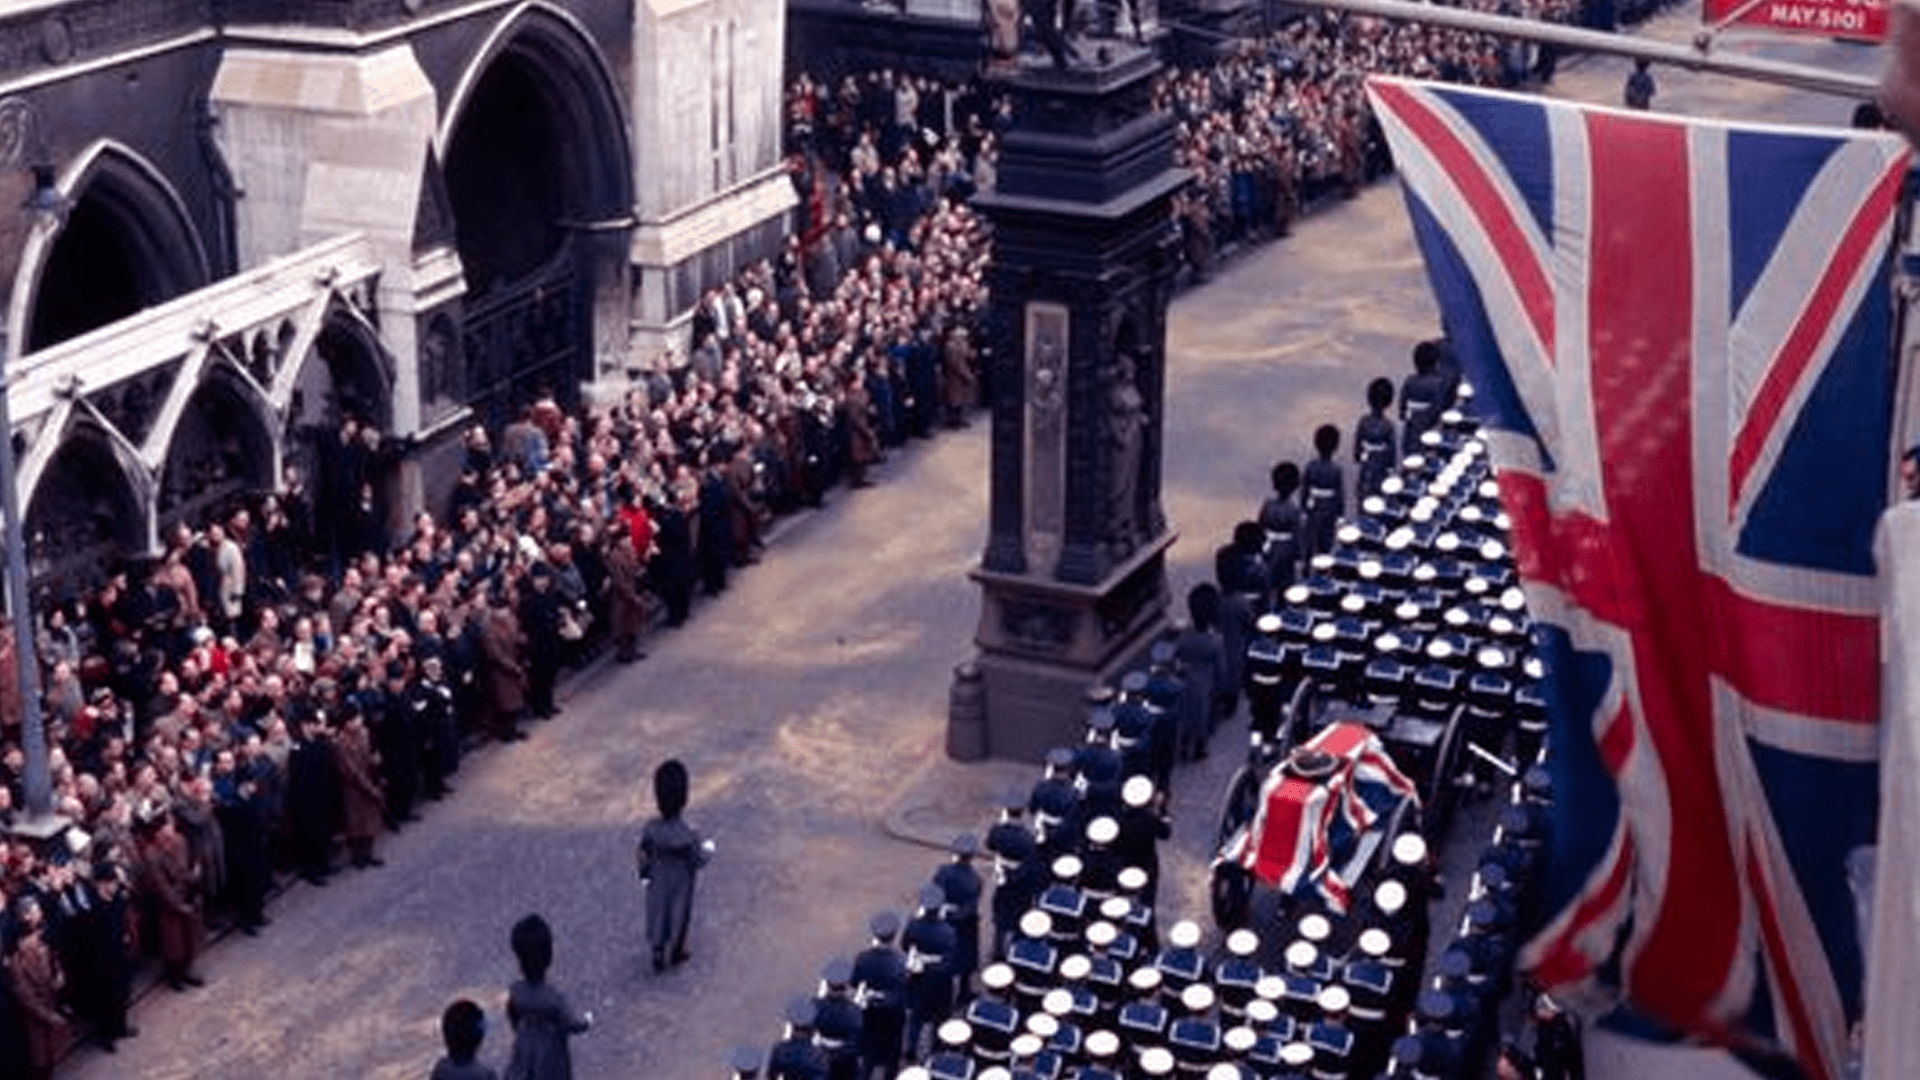 – The Queen’s funeral is expected to be watched by more than 2.5 billion people.